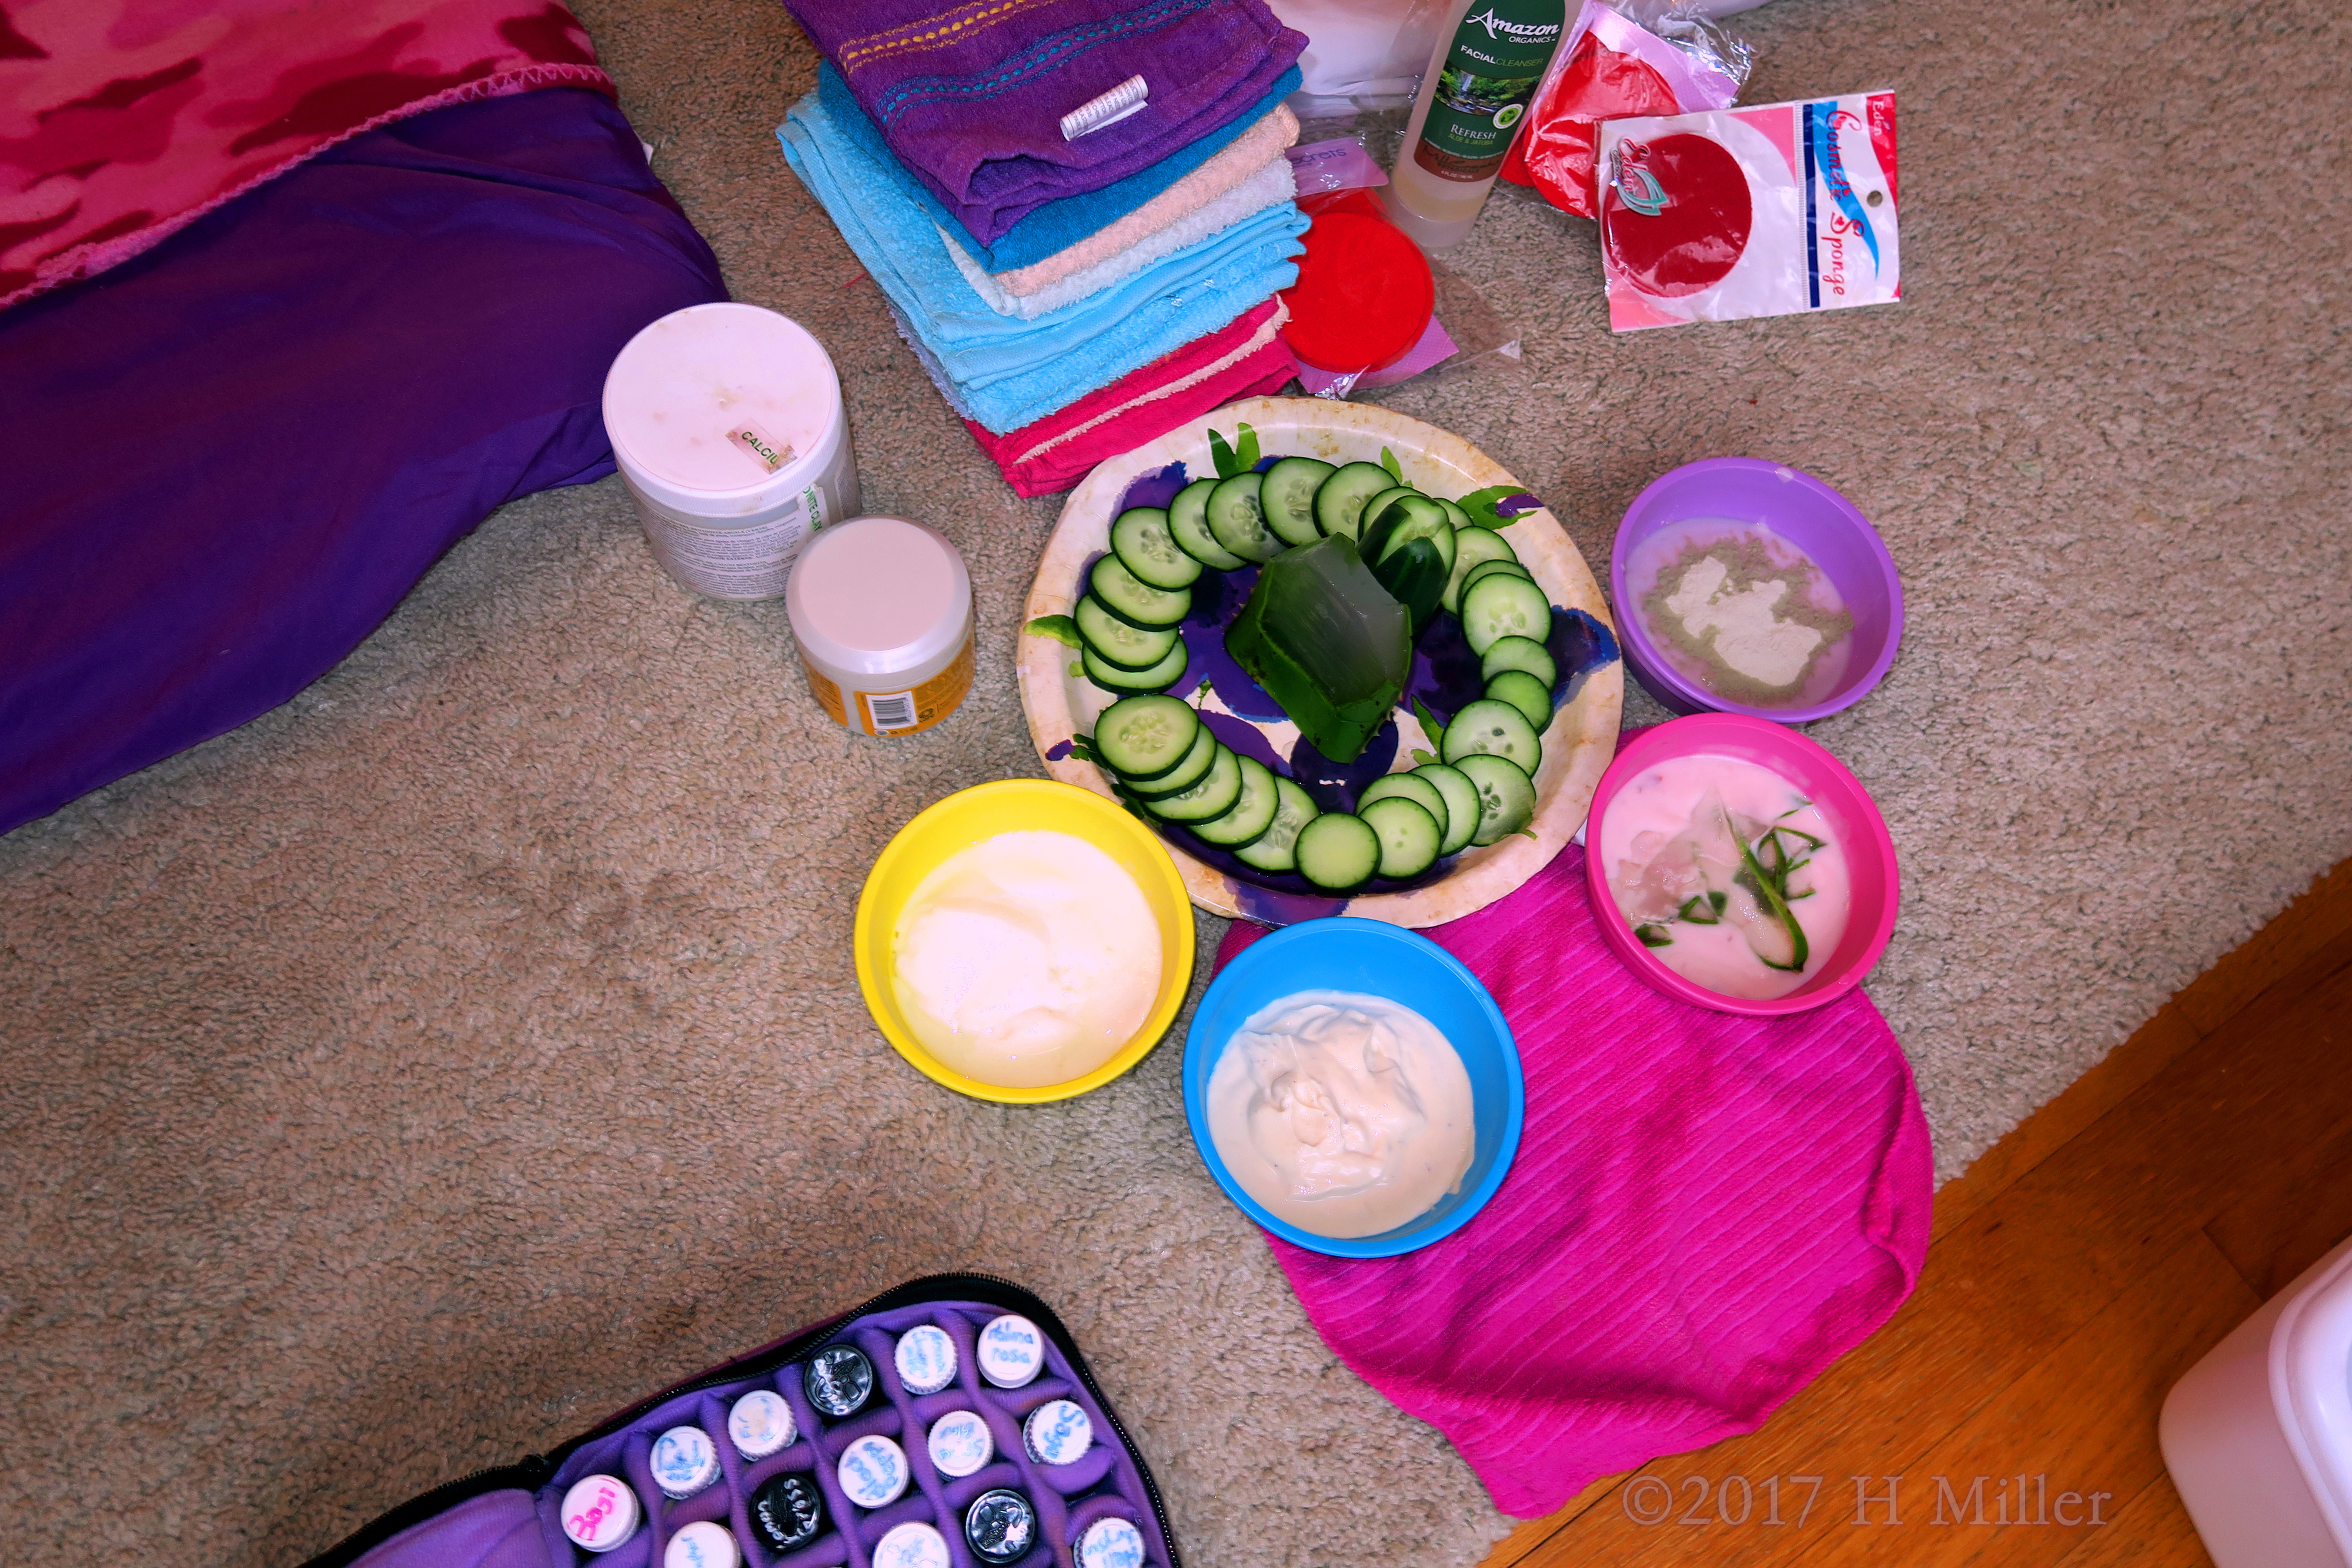 Cukes, Aloe, Creamy Face Masque And Towels! All That Is Needed For A Perfect Kids Facial. 